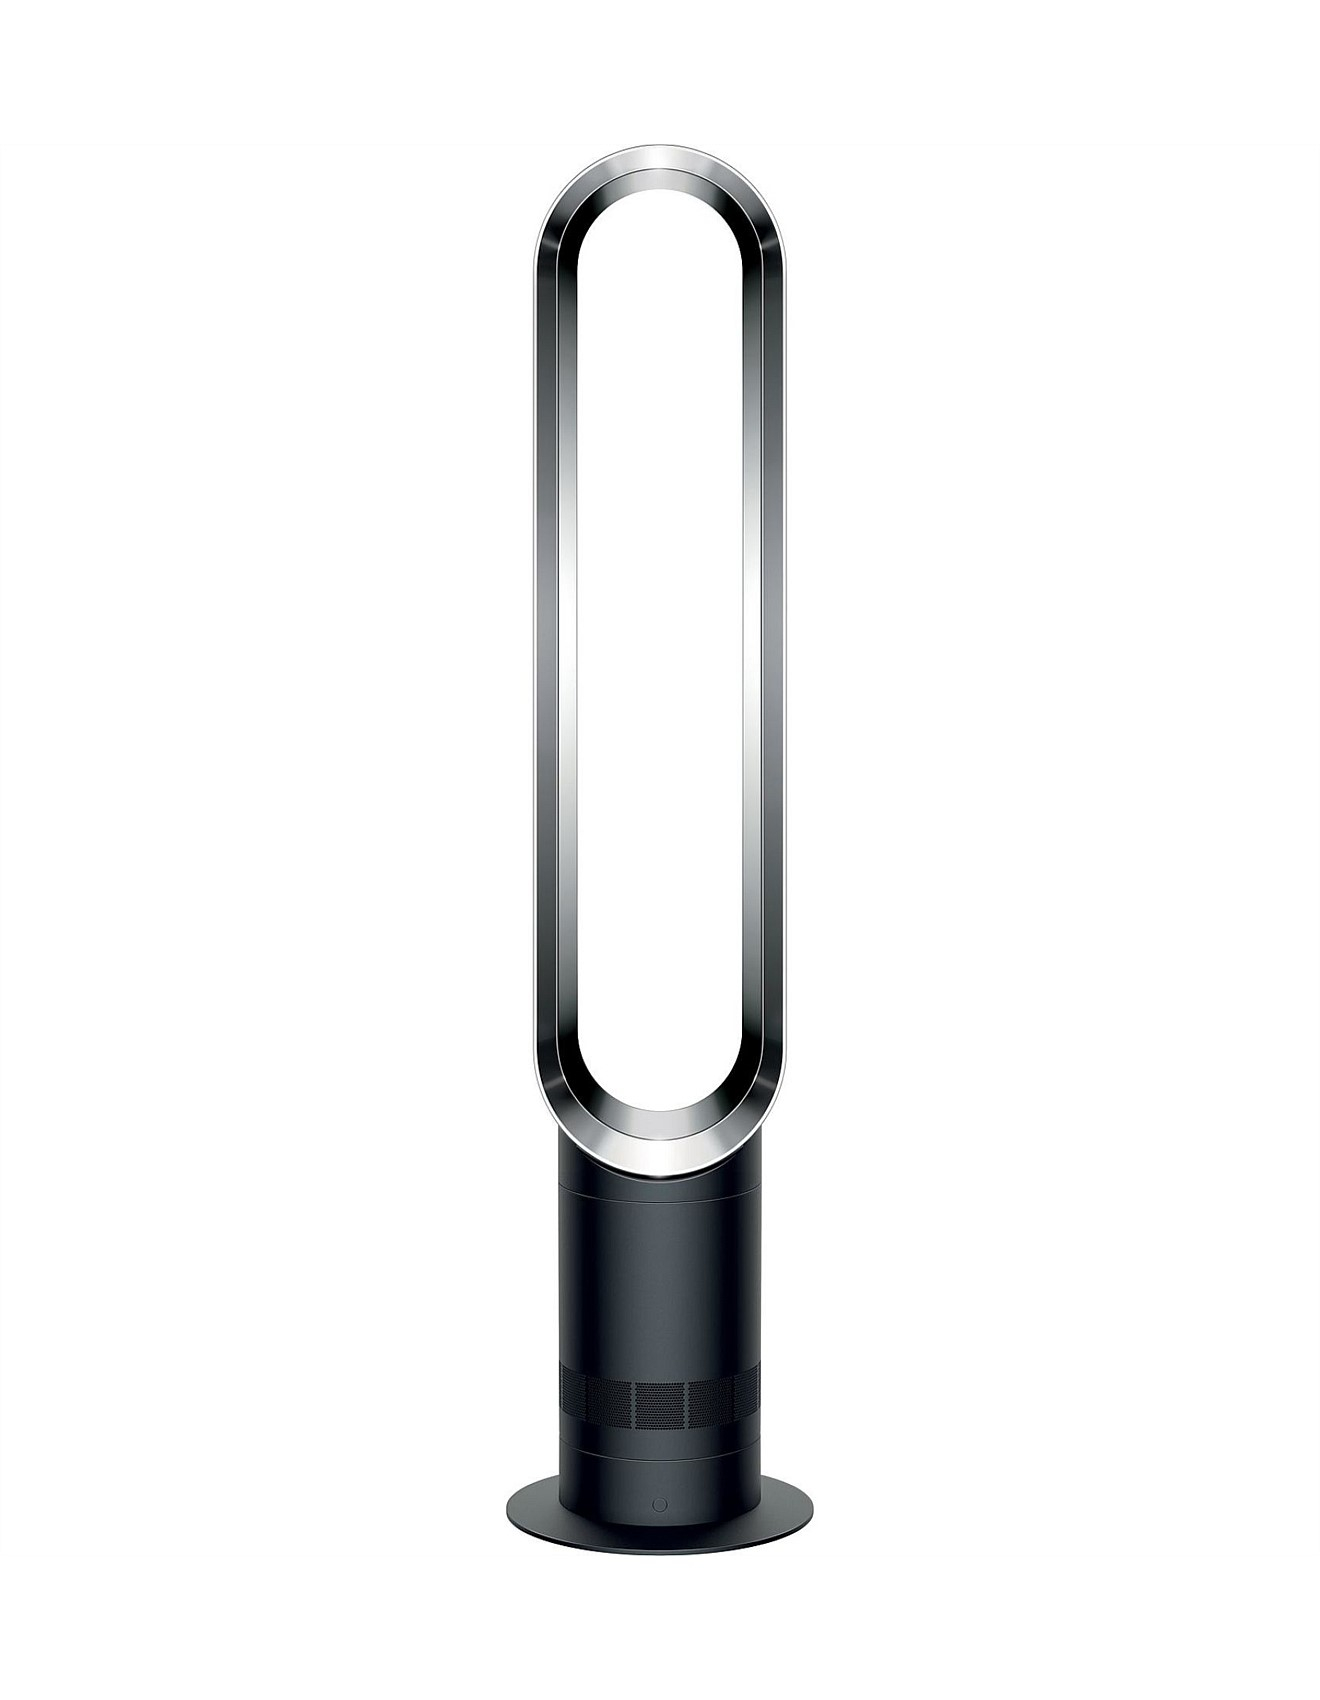 Dyson Cool Am07 Tower Fan Blacknickel intended for proportions 1320 X 1700